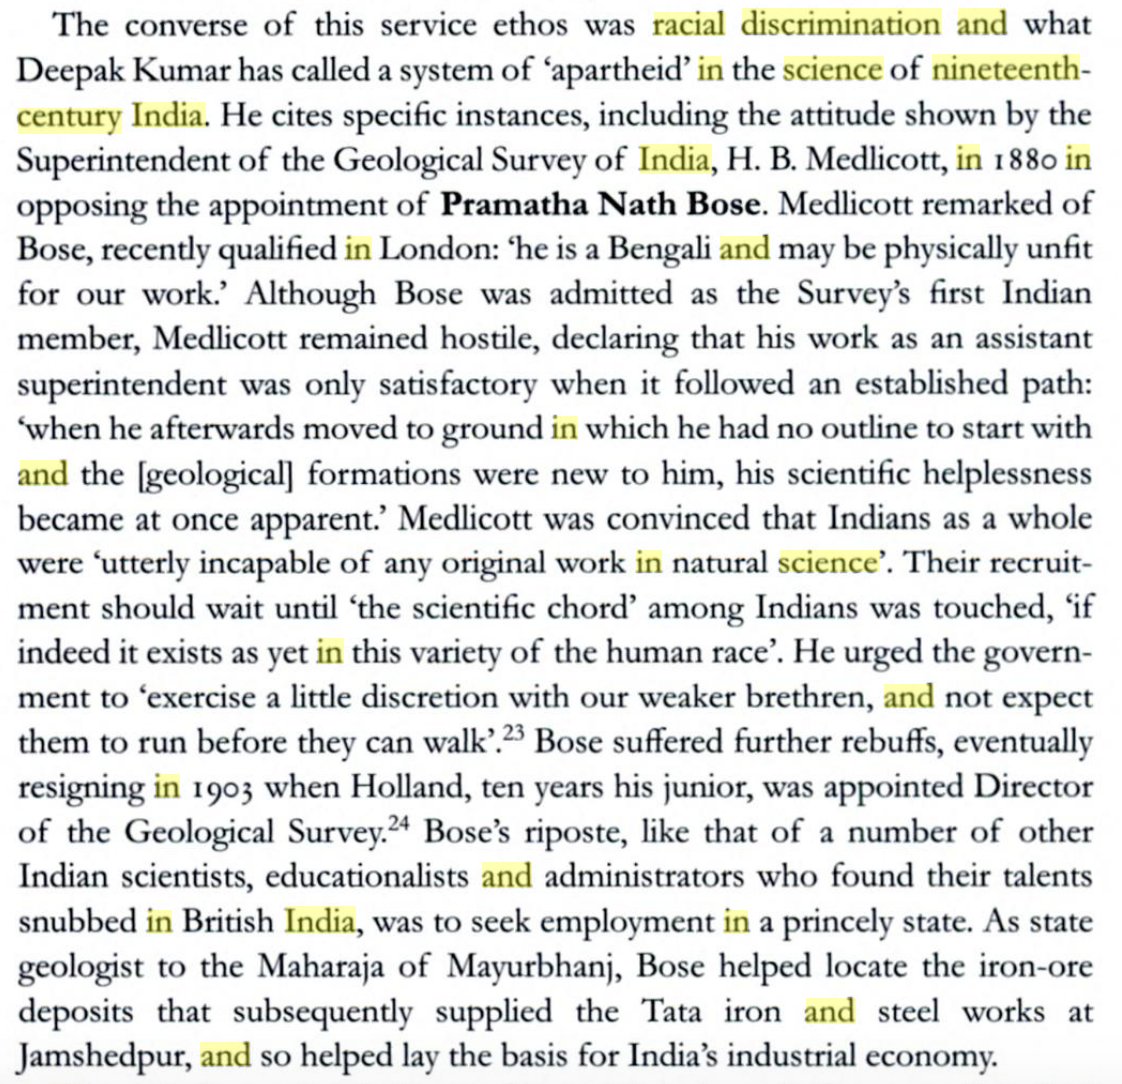 Such blatant racism against Hindus had a direct effect on the lives of Hindu scientists in the British Raj, many of whom were Brahmins. This incident from the life of Pramatha Nath Bose is recounted in the book "Science, Technology and Medicine in Colonial India" by David Arnold.